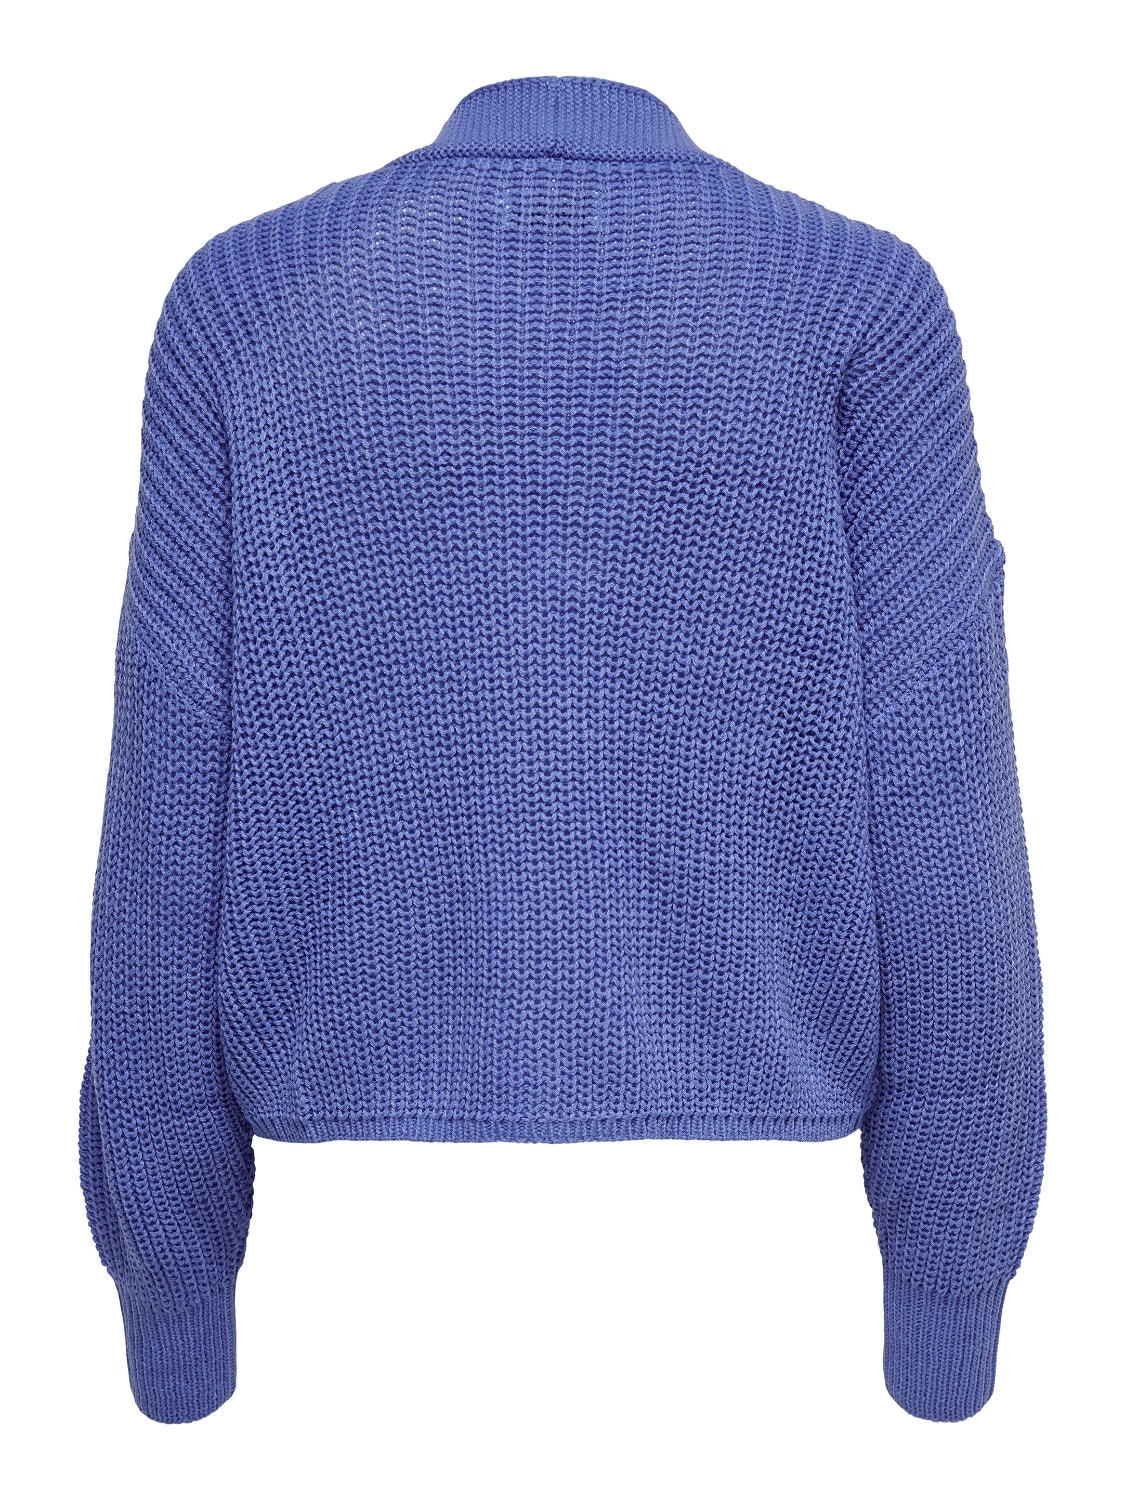 ONLY Knitted cardigan -Ultramarine - 15211521